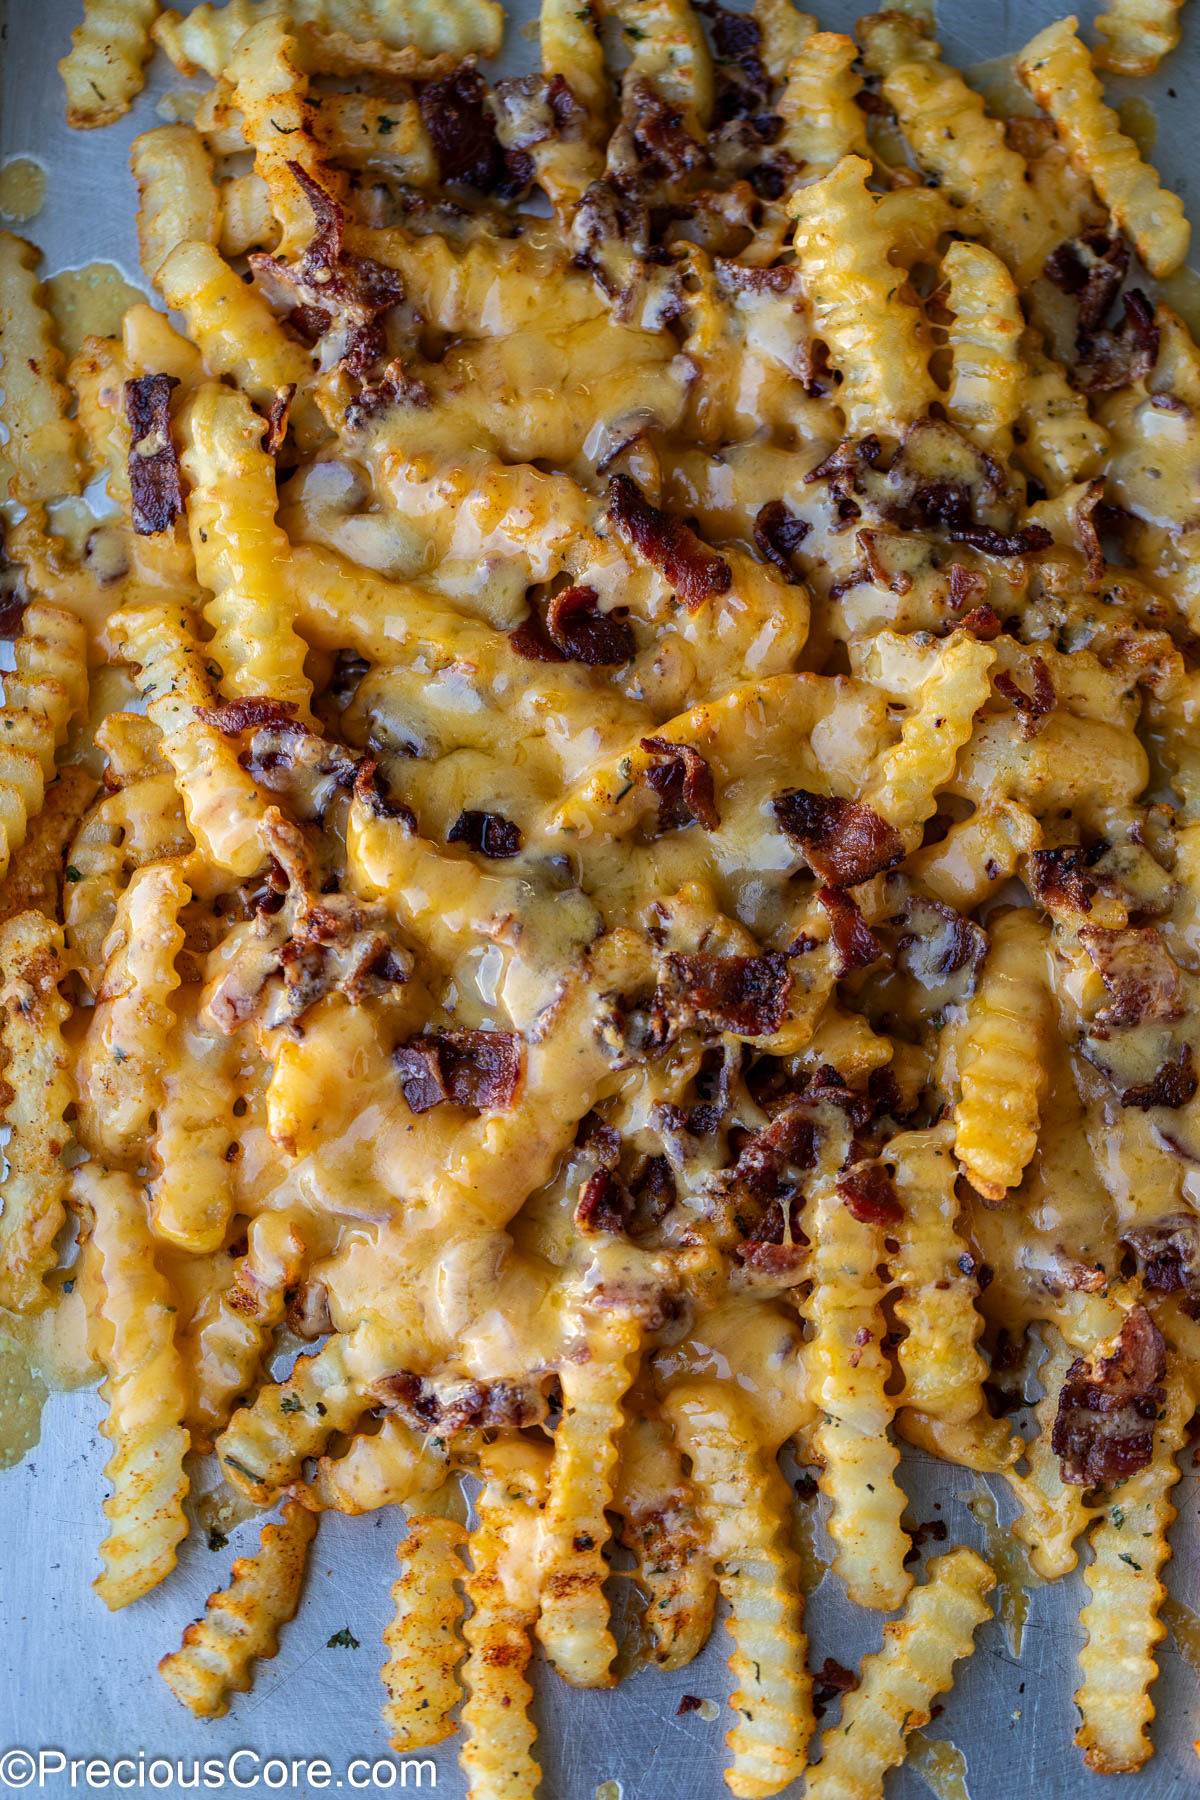 Fries covered with melted cheese and crumbled bacon.